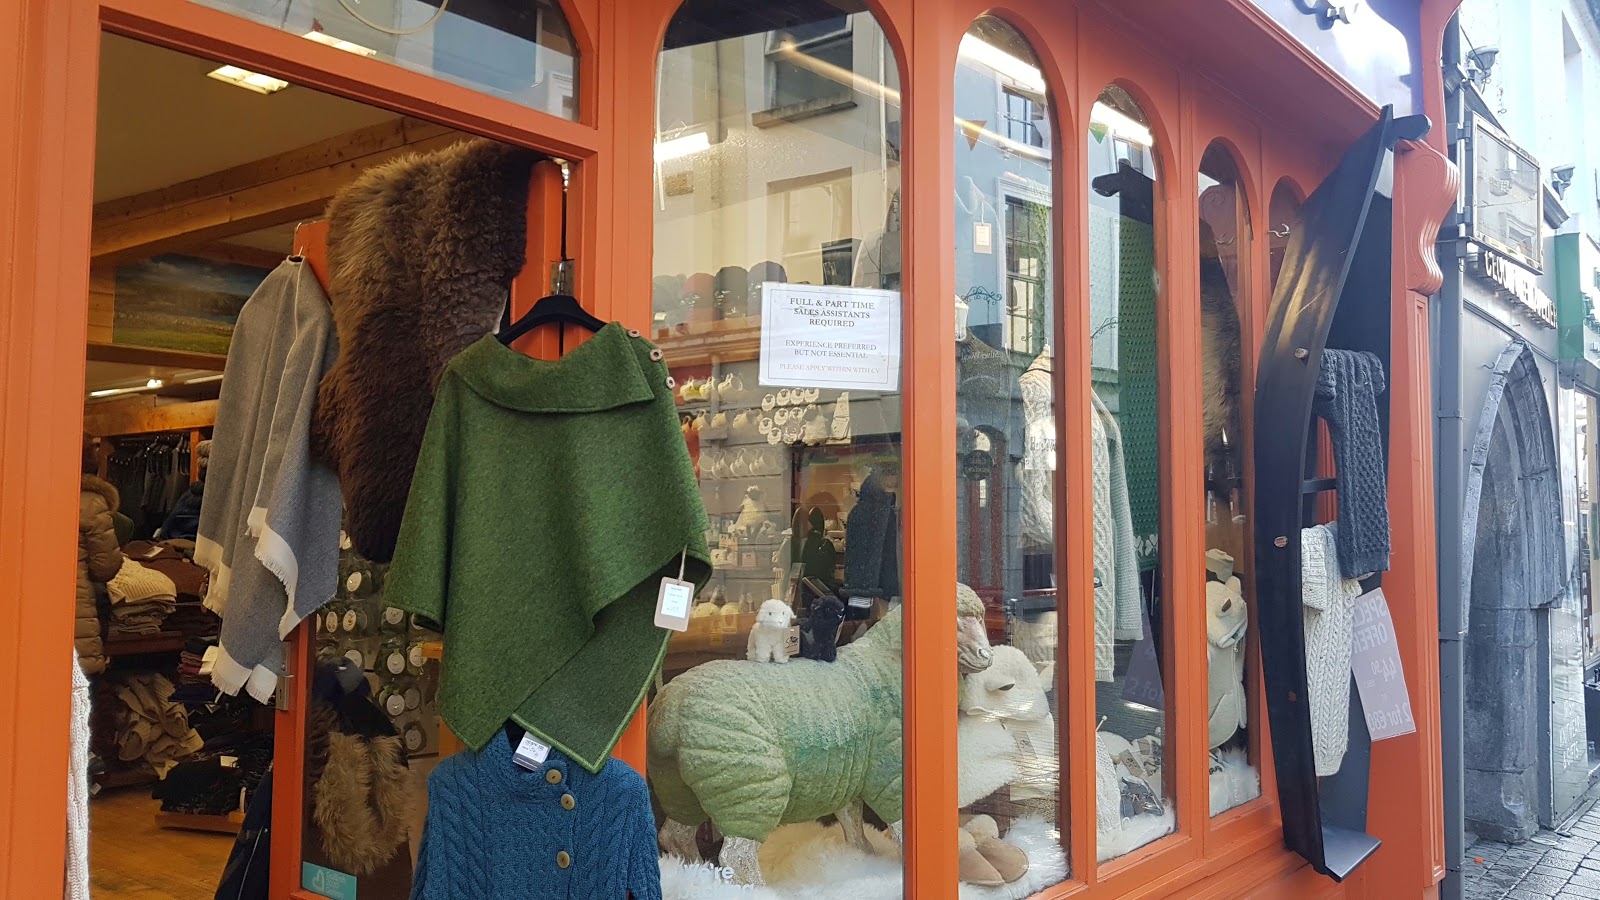 shop-front with job advertisement sign, and green knitted poncho on a hanger, along with a sheepskin rug and a grey knitted jumper